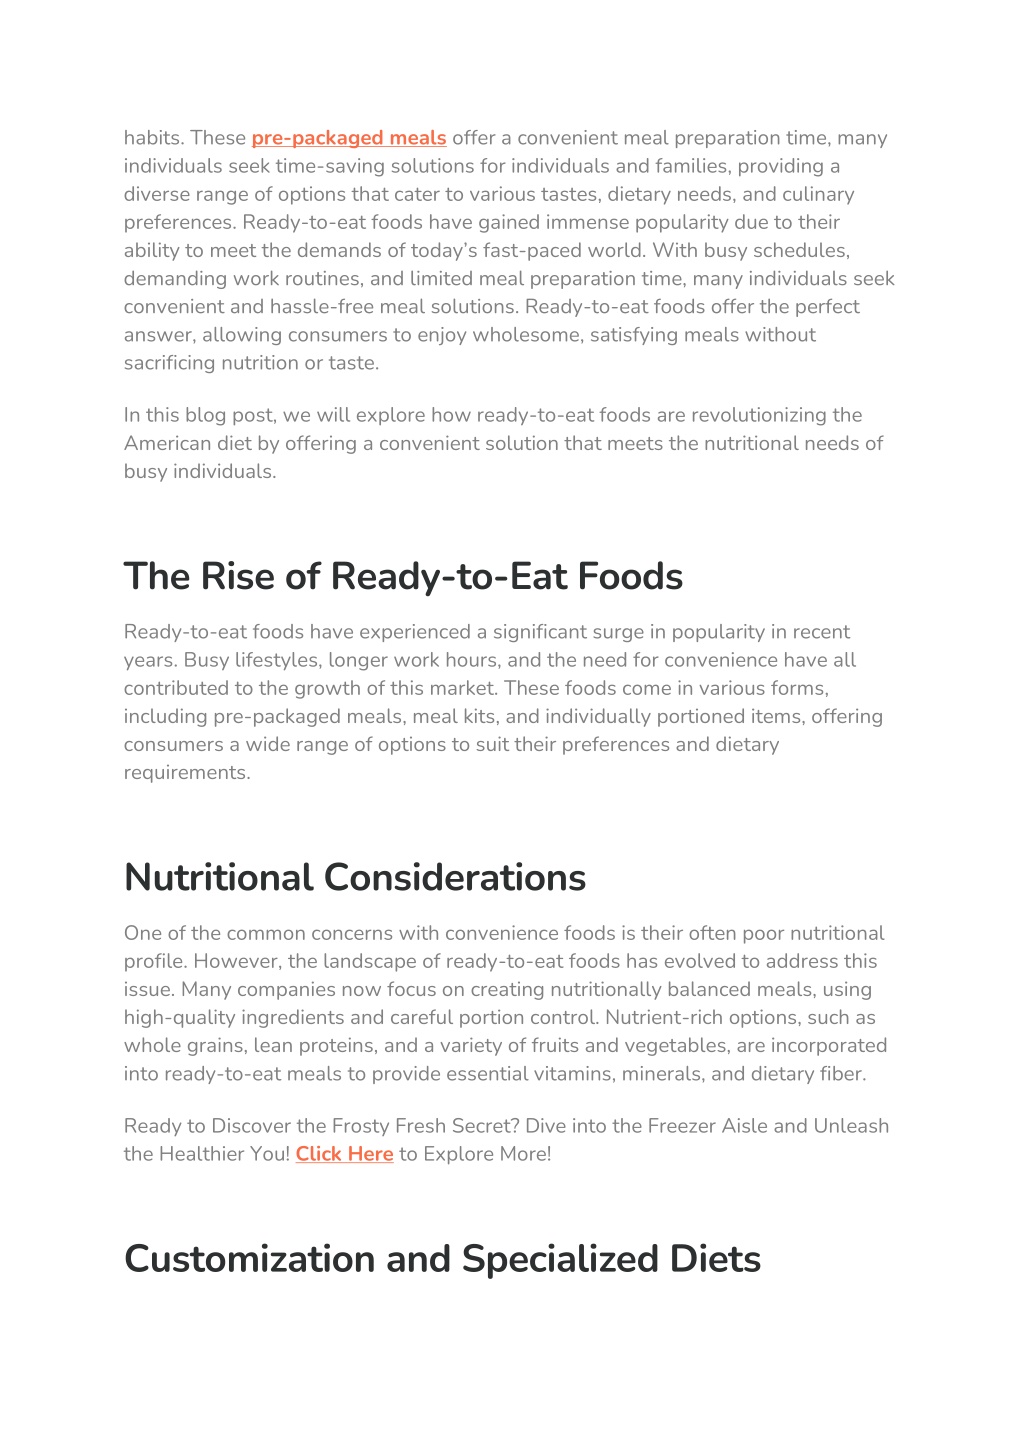 PPT - Nutrition How Ready-to-Eat Foods Are Revolutionizing the American ...